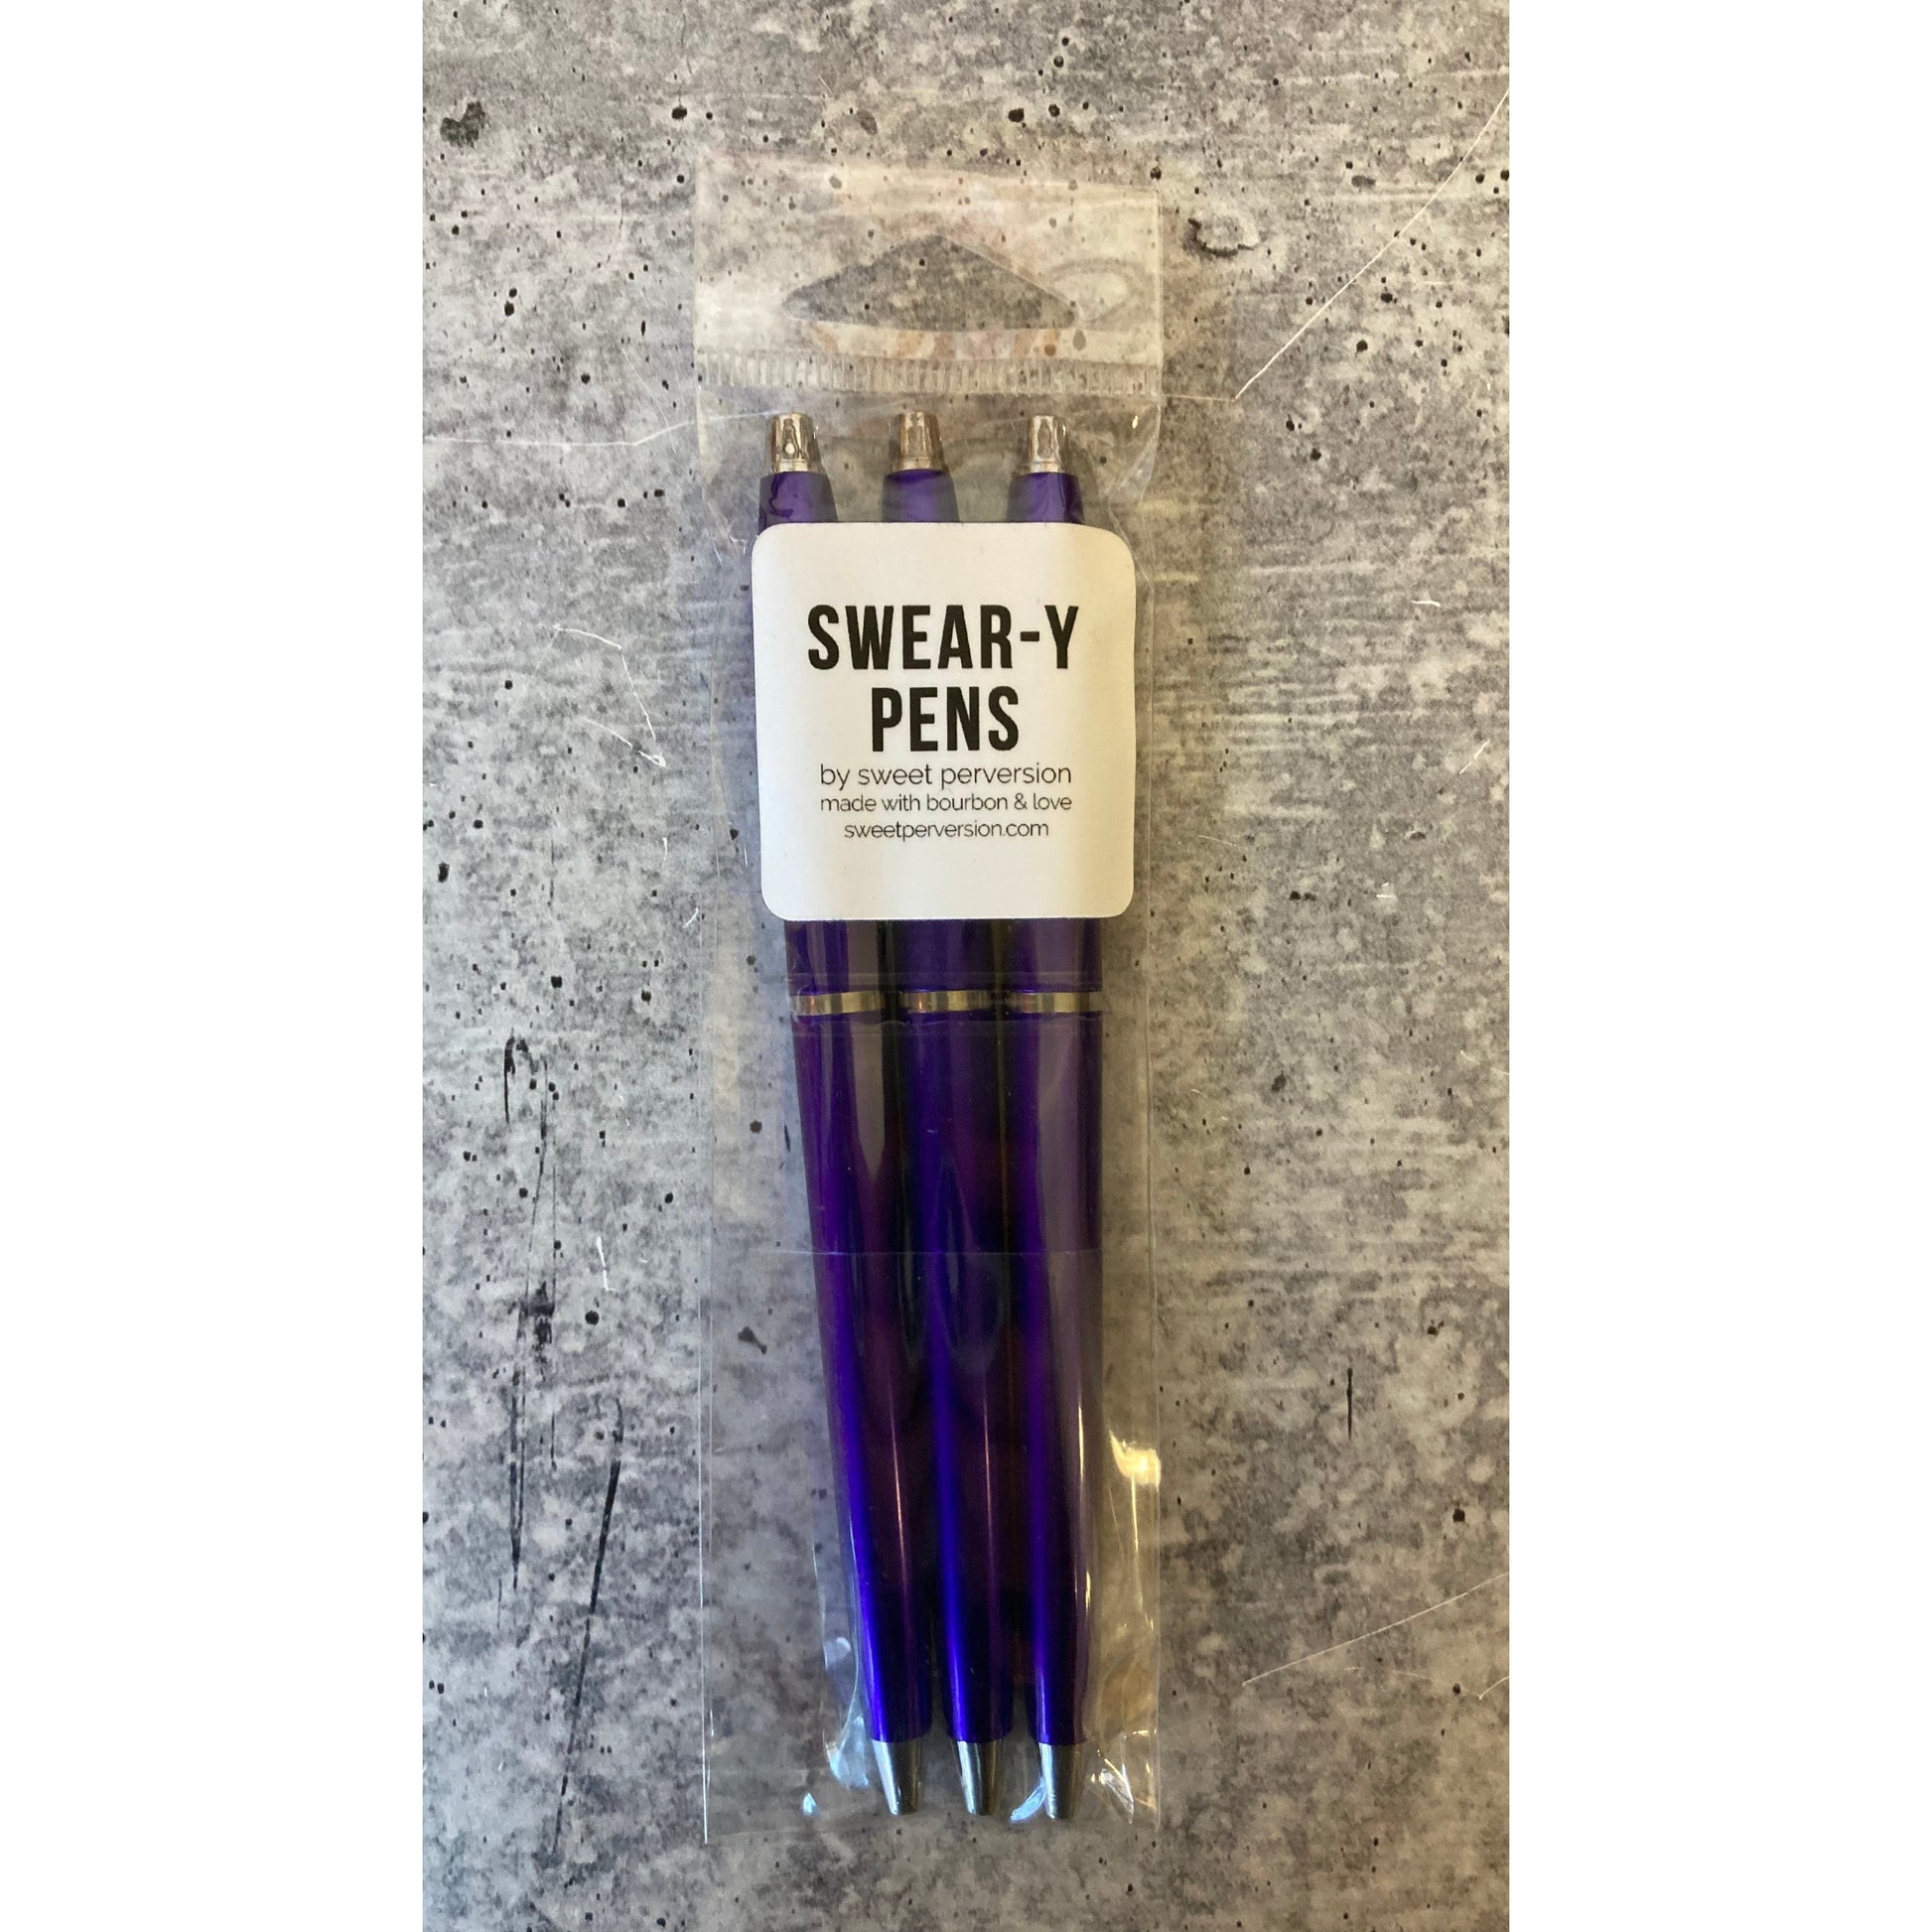 SWEARY PENS / Funny Rude Pens / Adults Only / This Meeting is Sht 